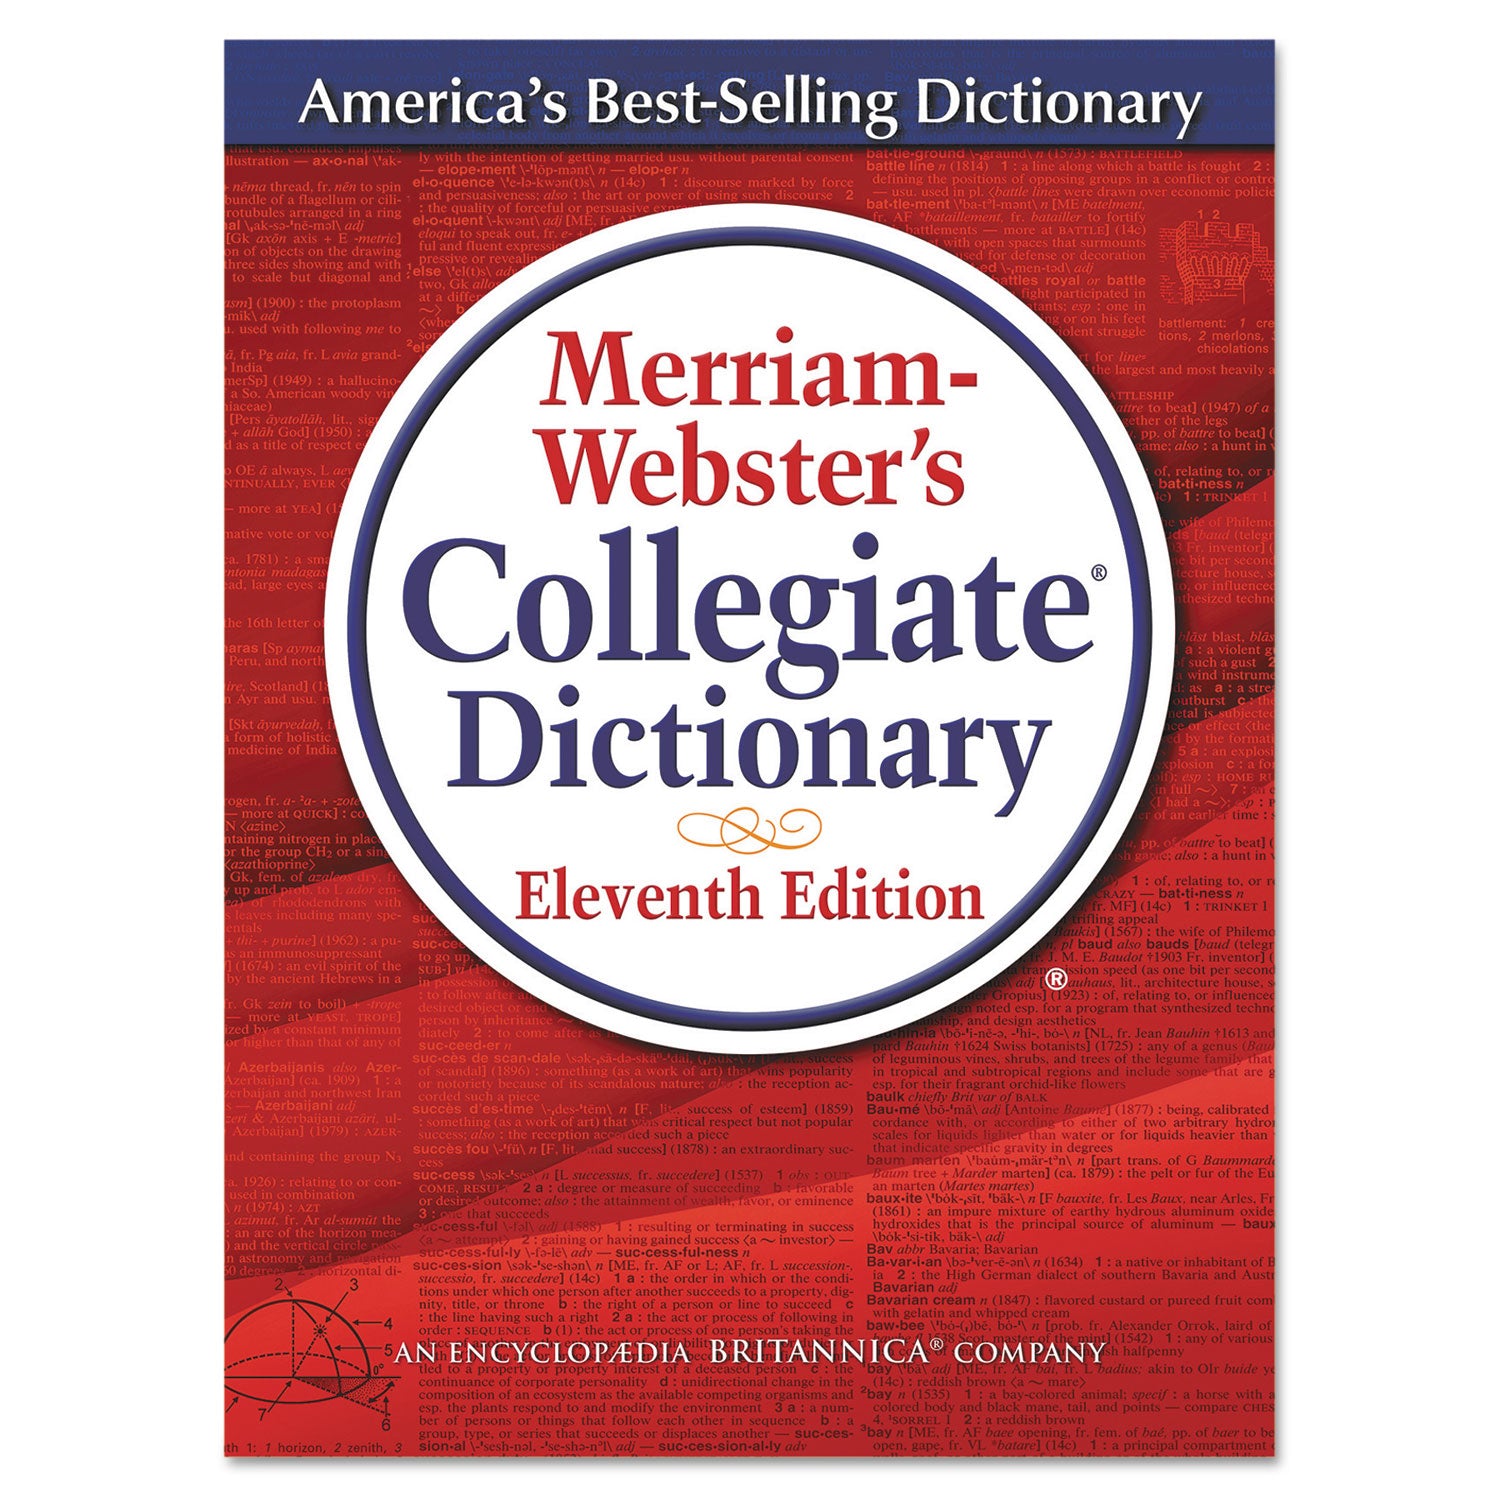 Merriam-Websters Collegiate Dictionary, 11th Edition, Hardcover, 1,664 Pages - 